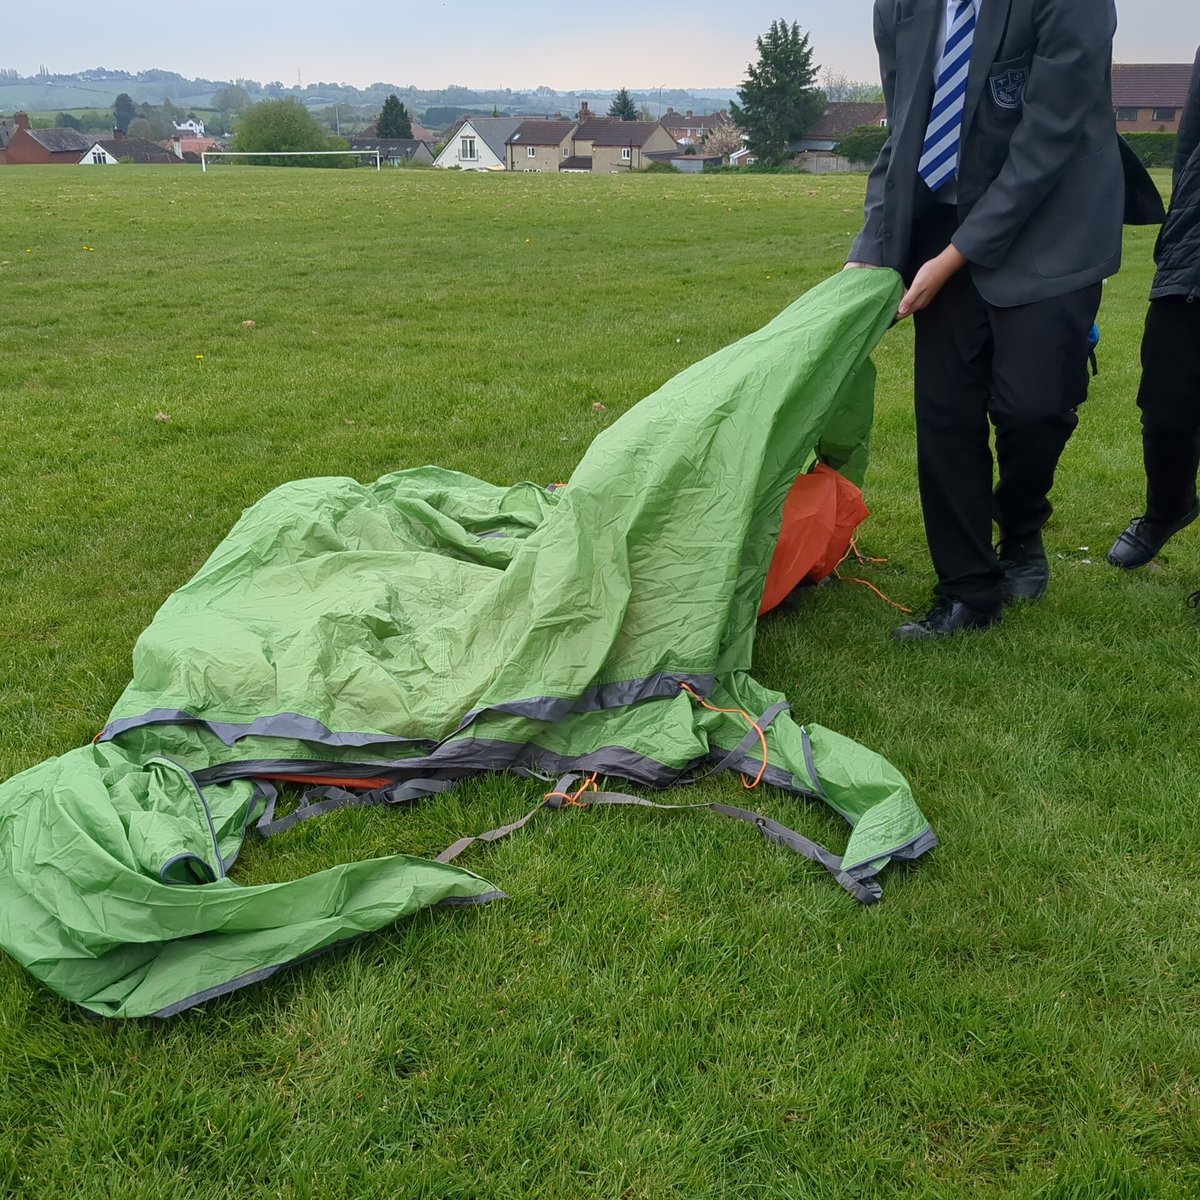 Tents skills tonight... Who is going to pitch their tent first? #dofe #skillsforlife #teamwork